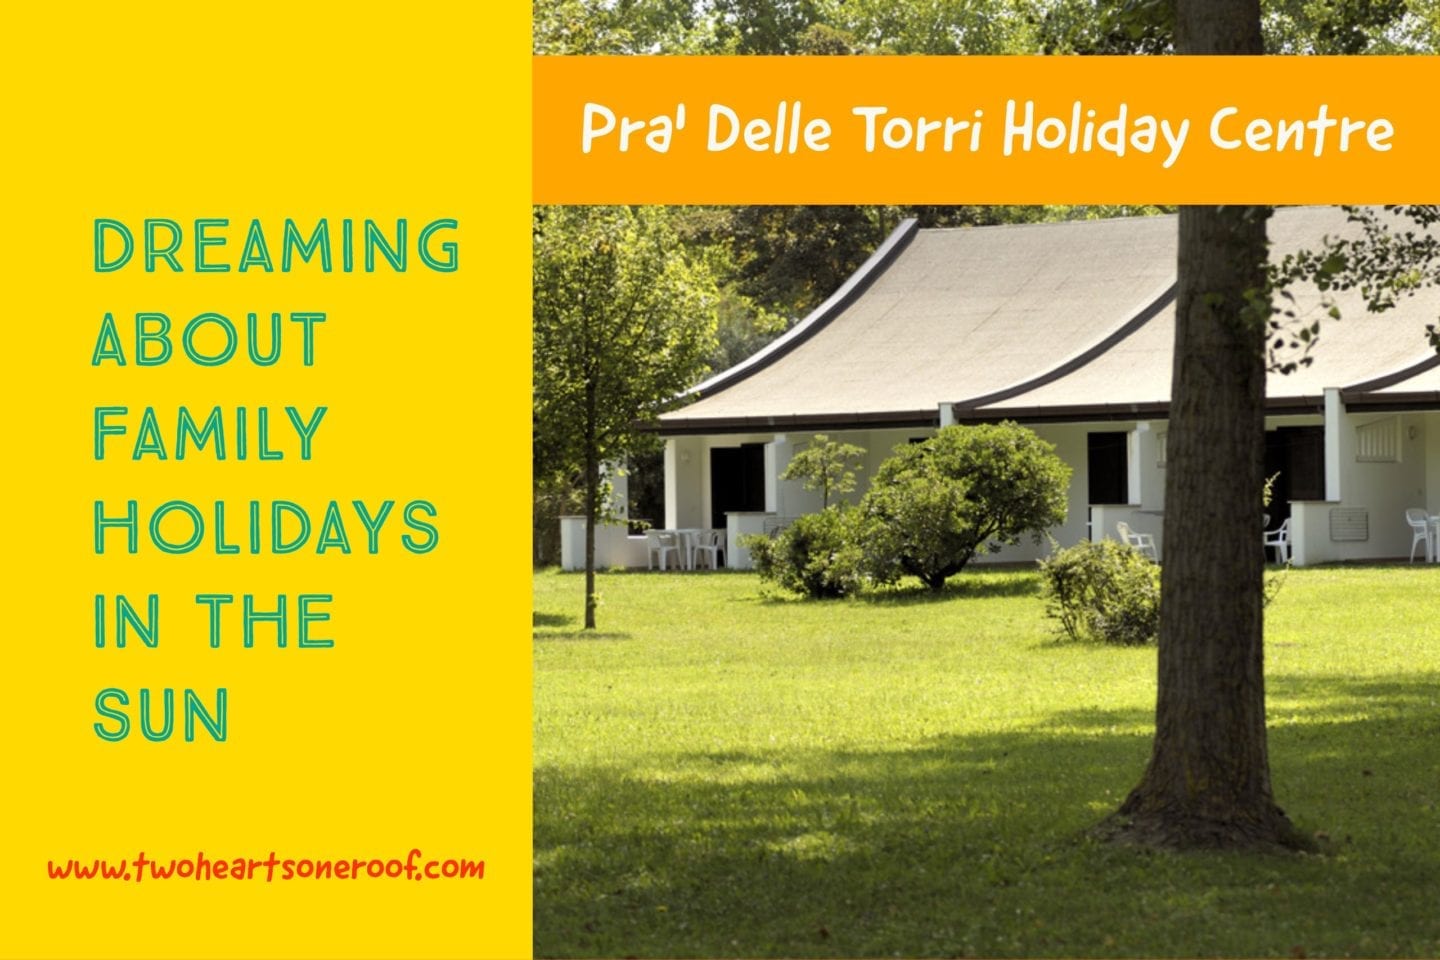 Dreaming about Family Holidays in the Sun – Pra’ Delle Torri Holiday Centre